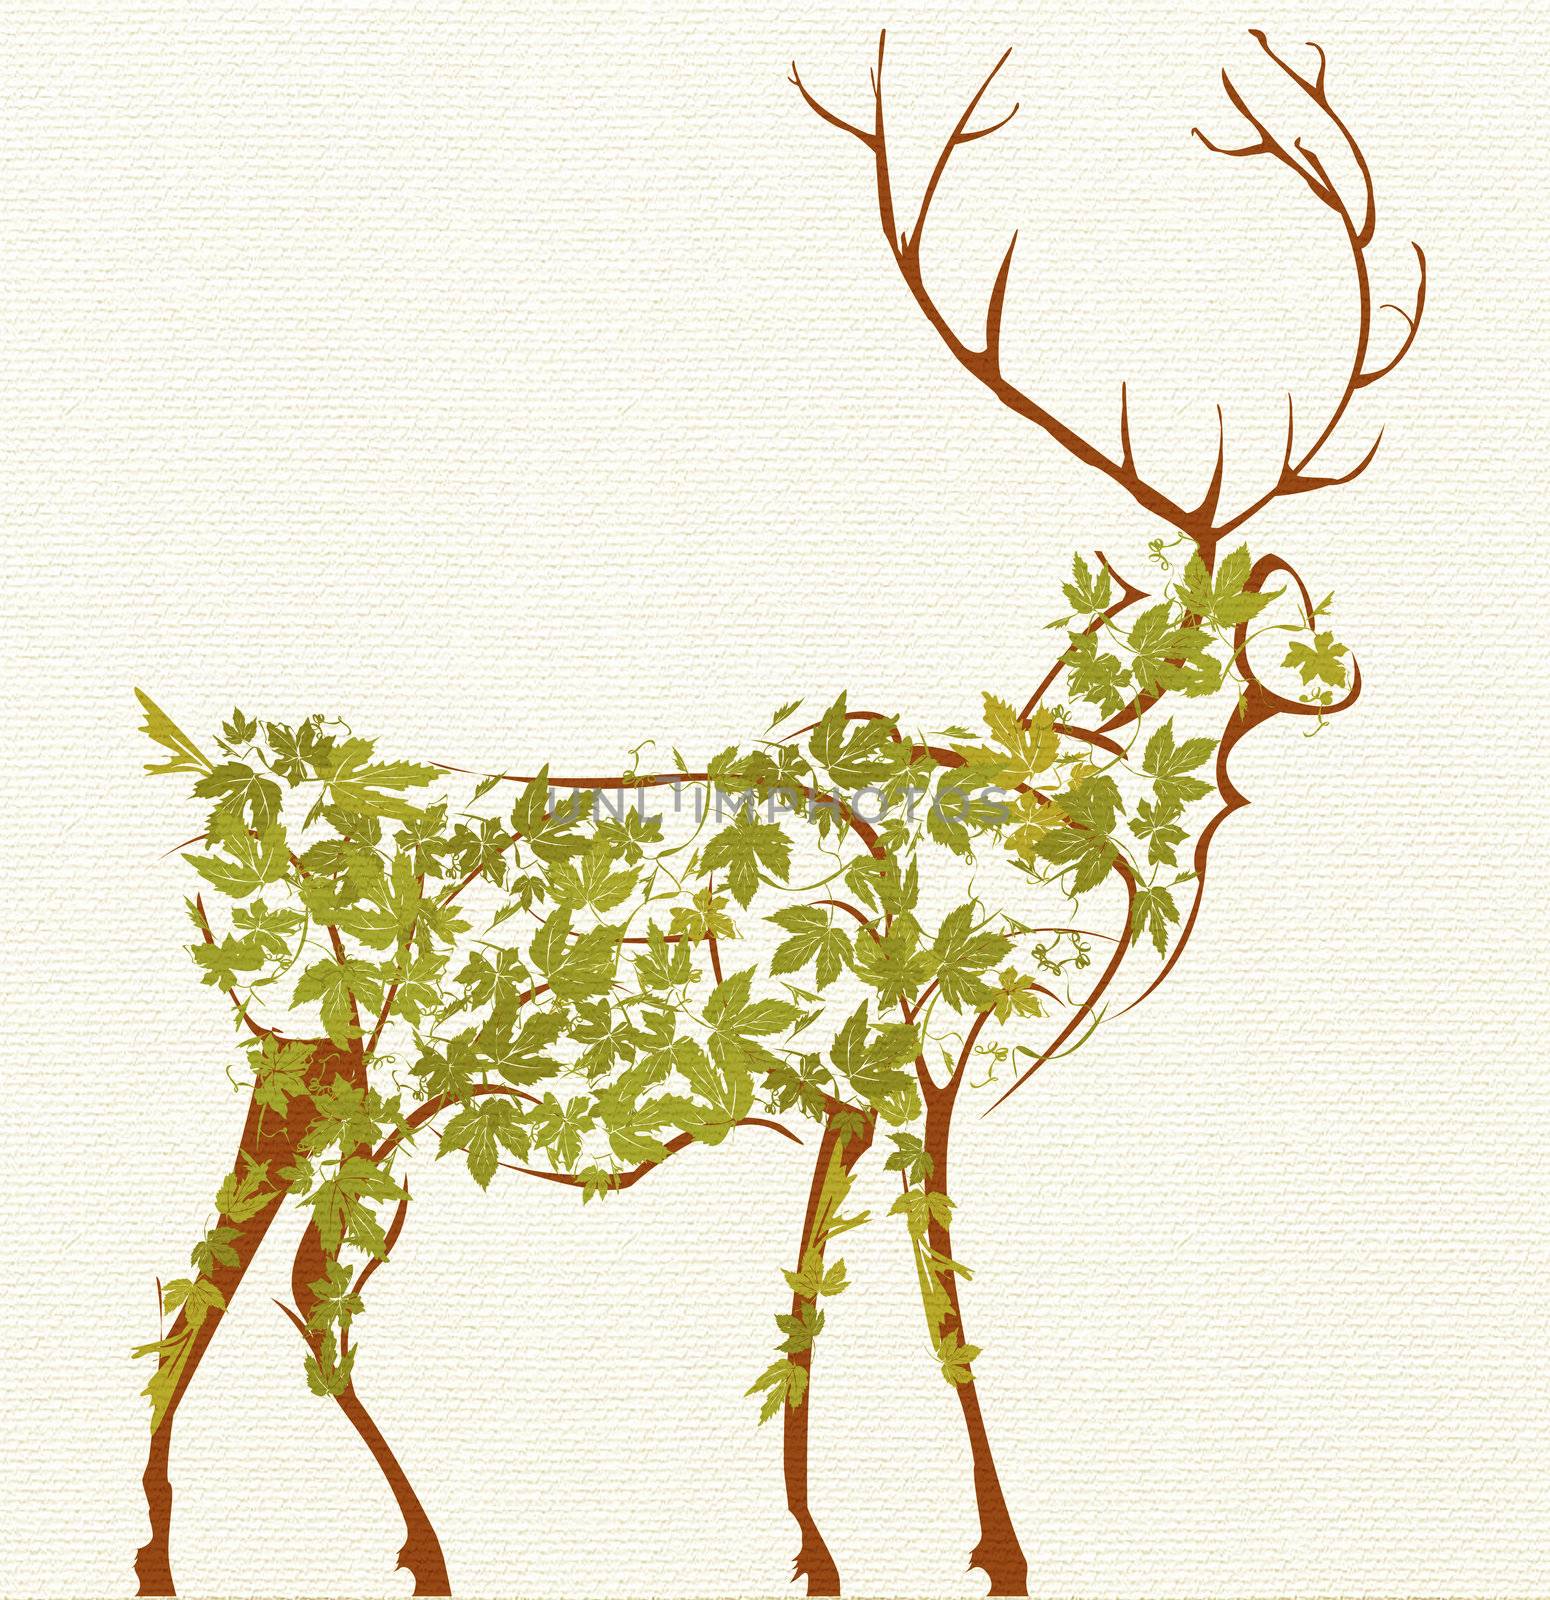 Illustrated deer on a canvas like texure